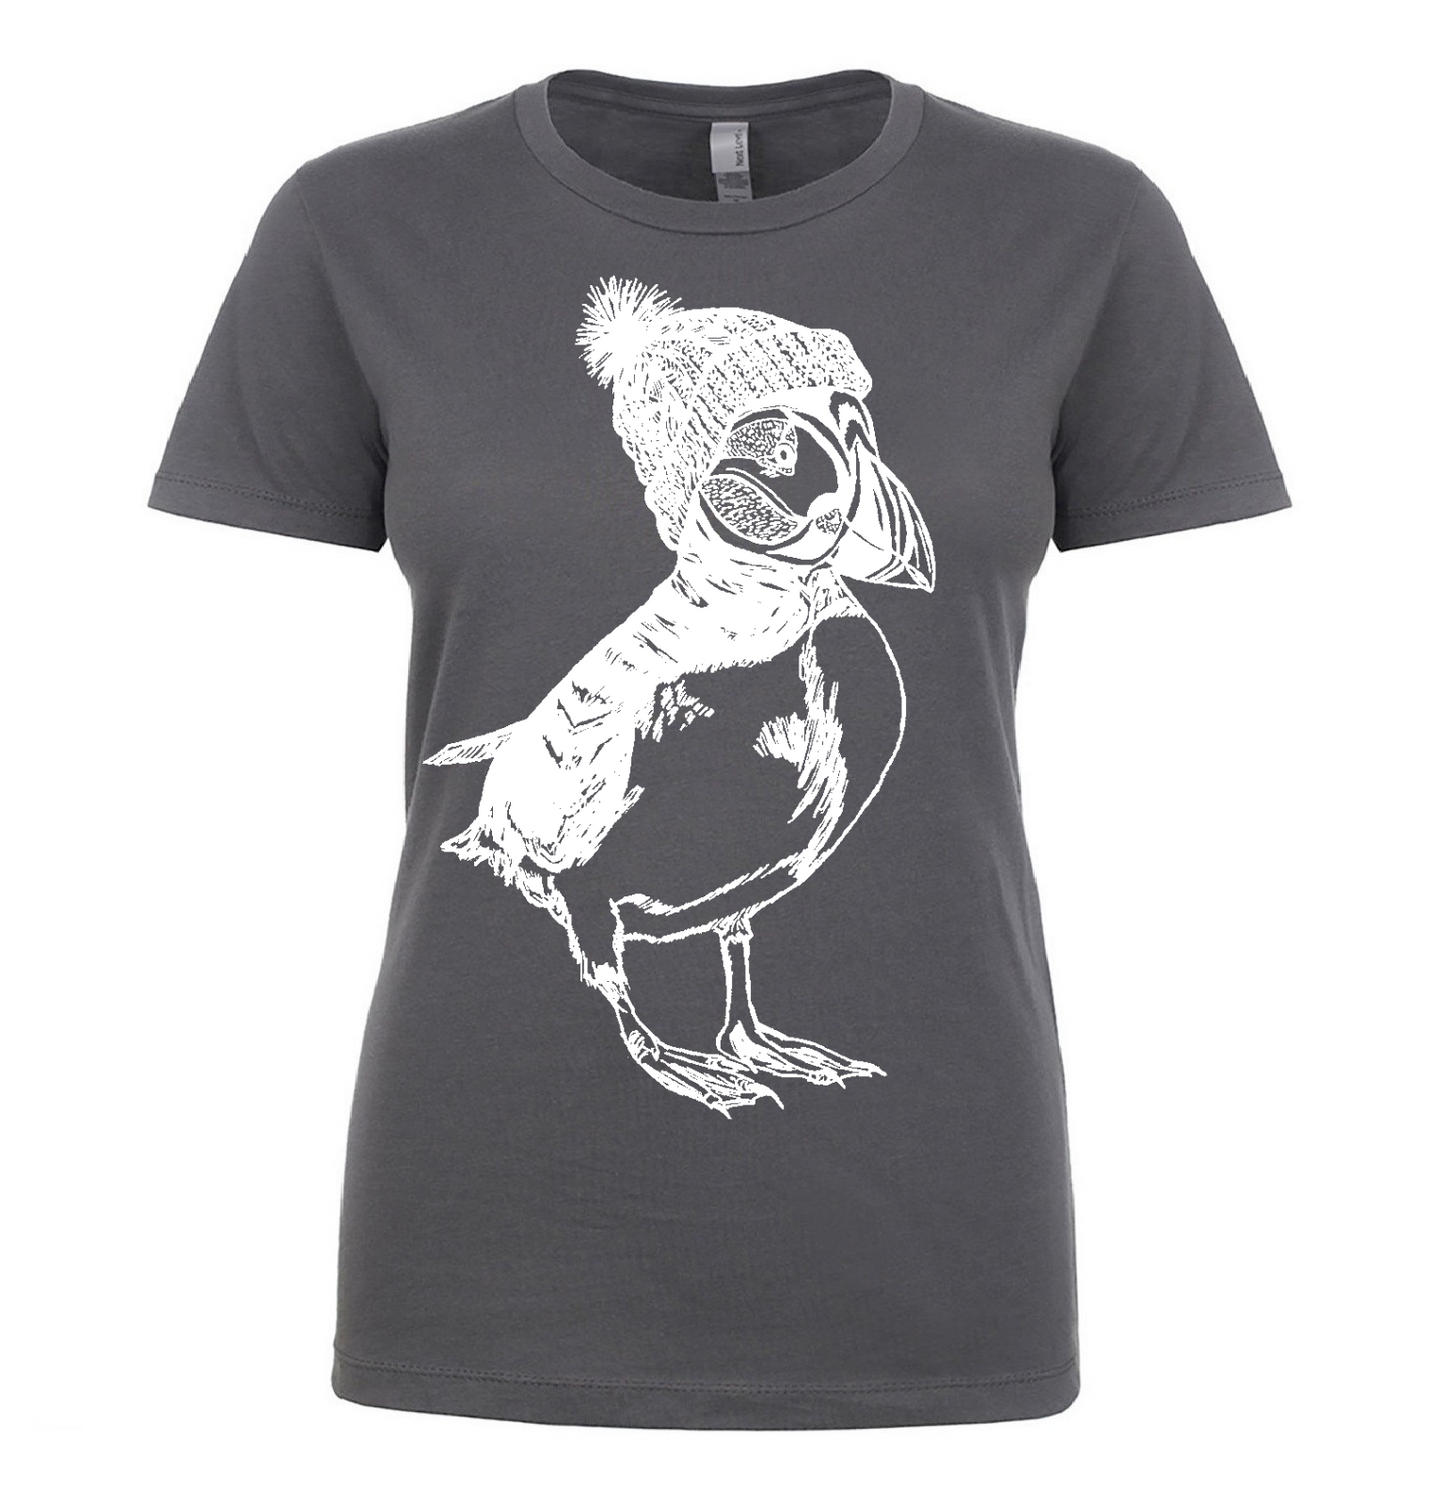 Puffin Wearing a Pom Pom Hat Ladies T Shirt